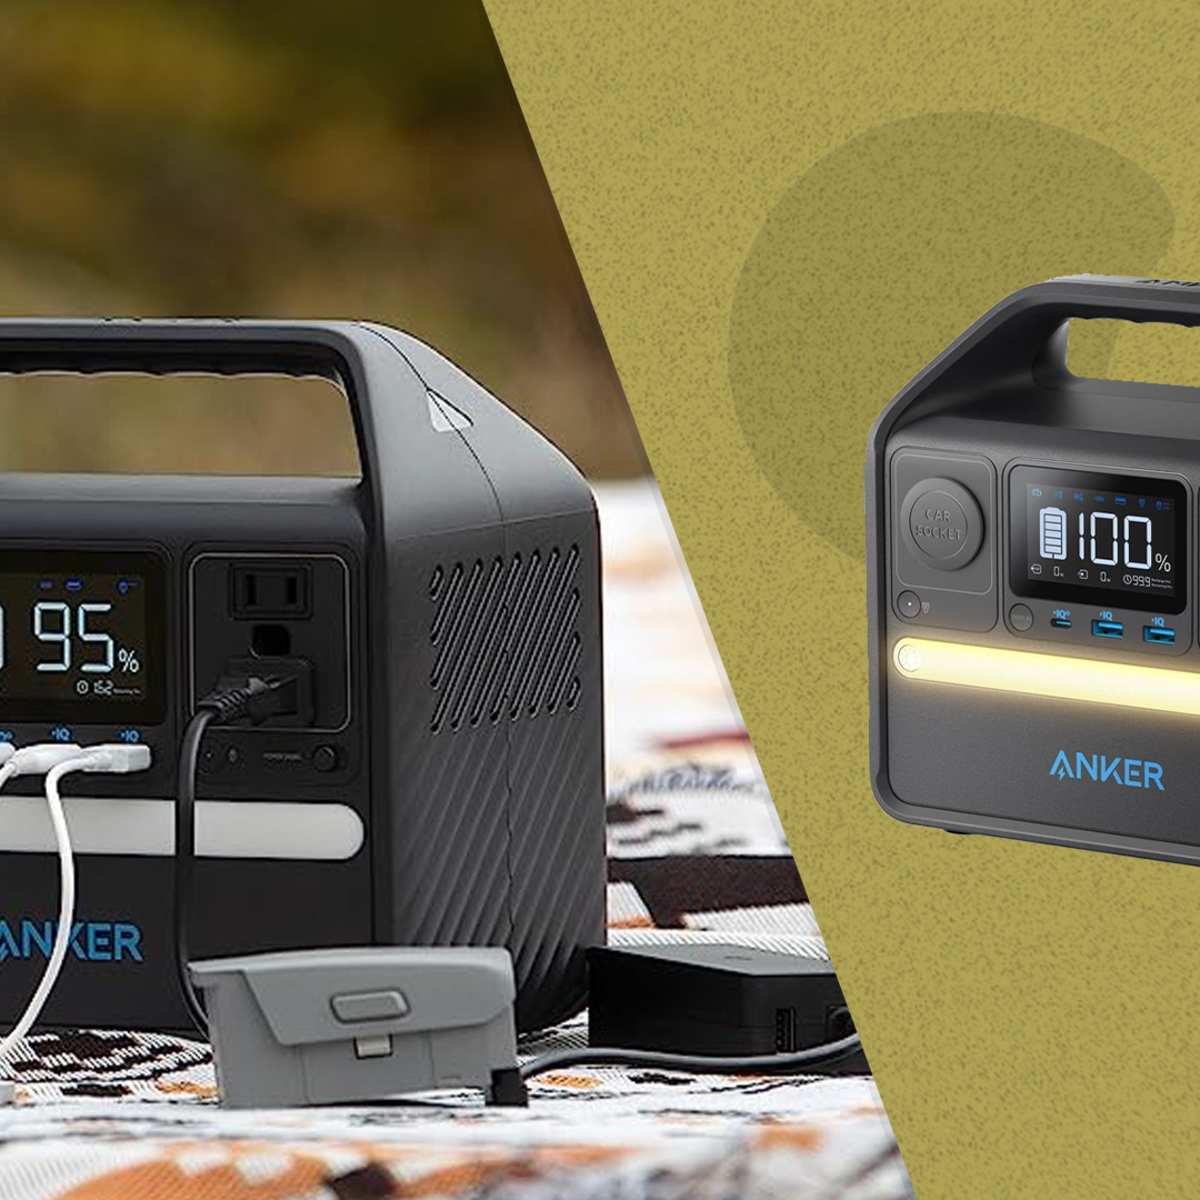 The Anker 521 Portable Power Station Is Now Under $175 - Men's Journal